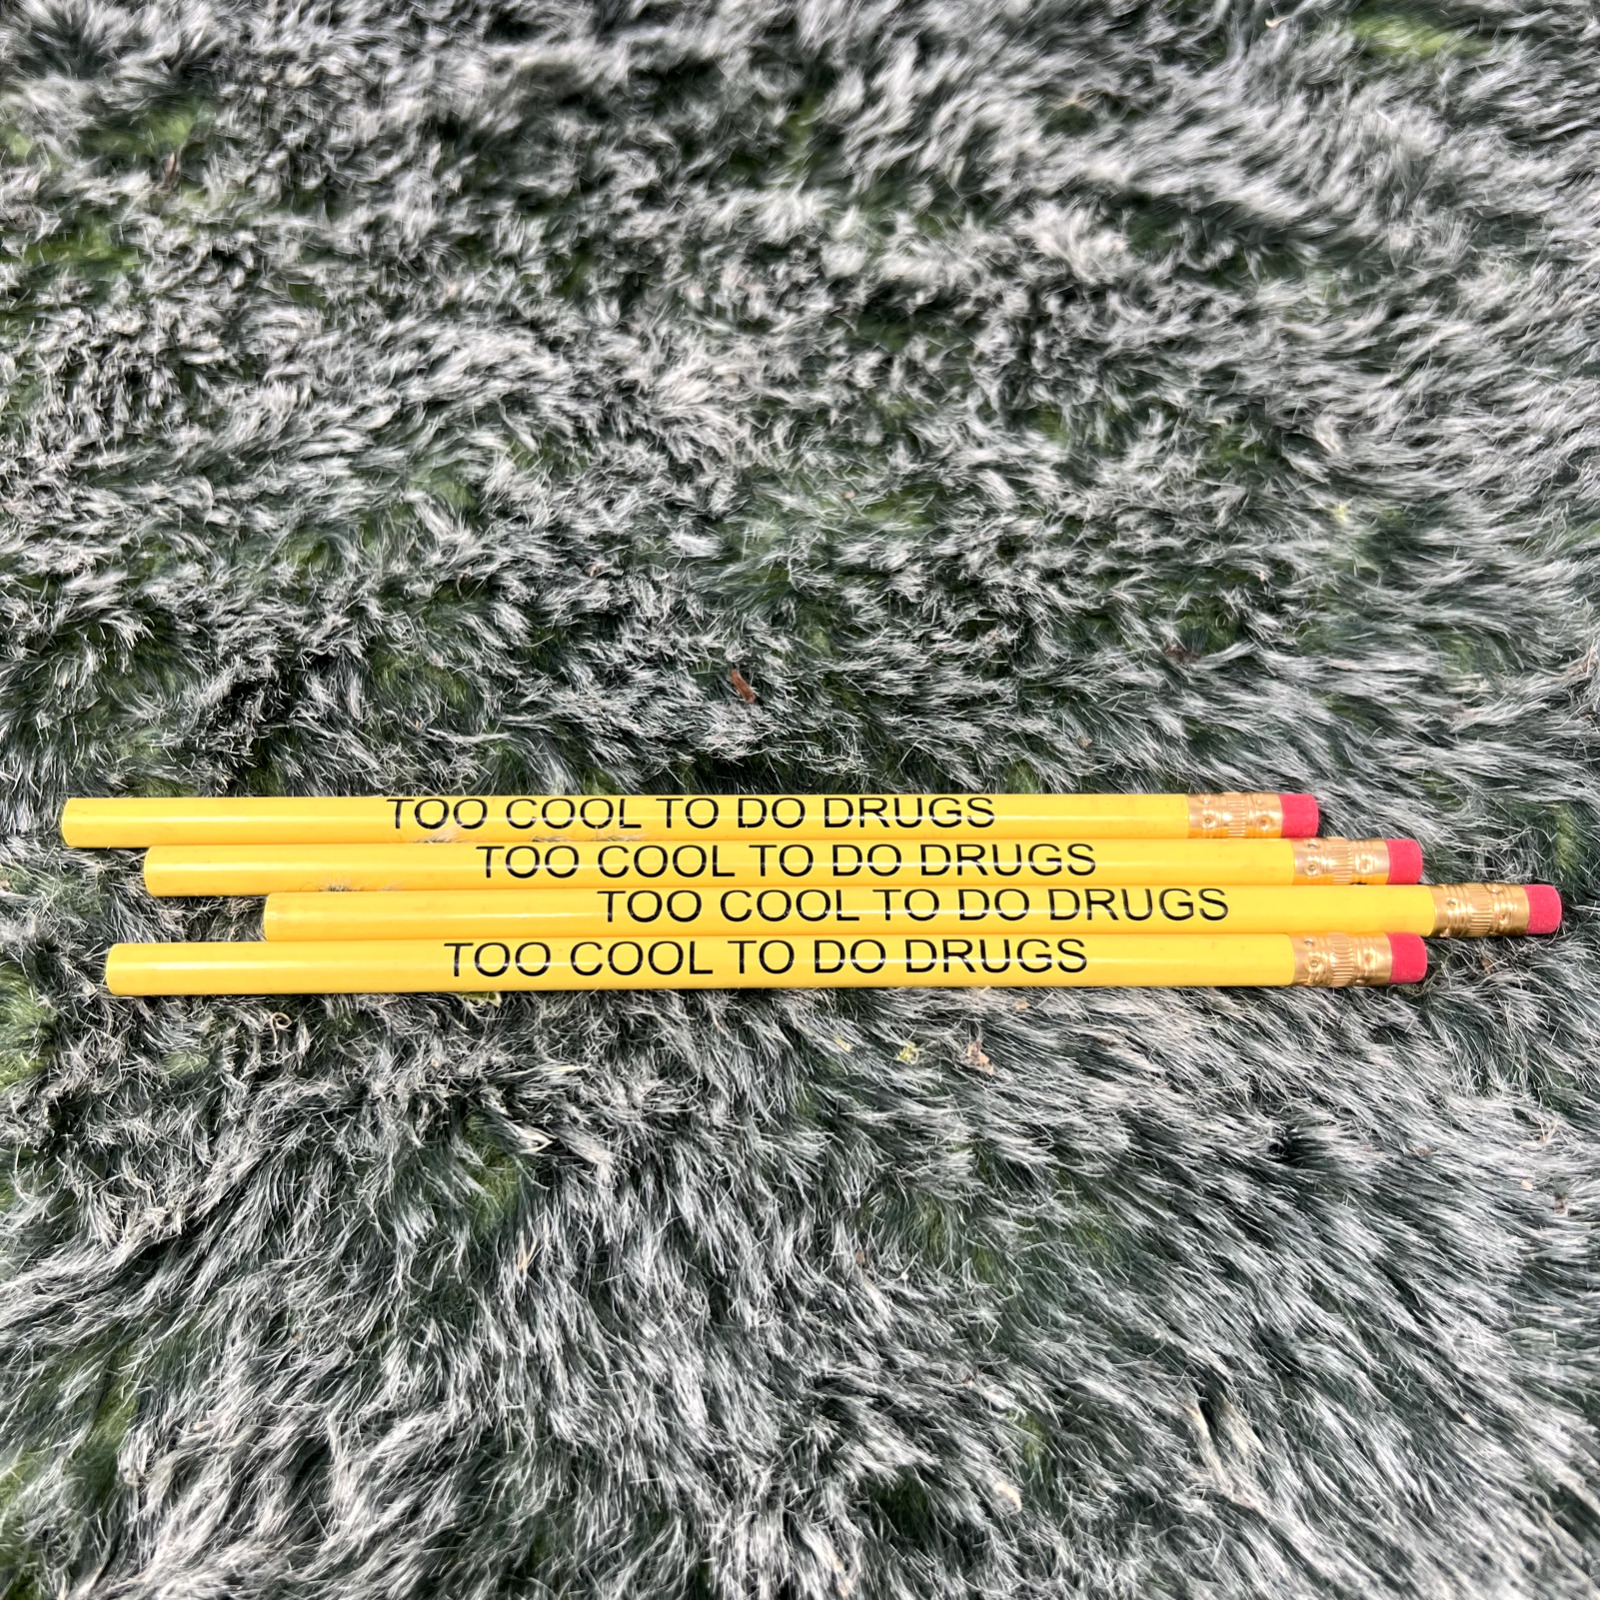 TOO COOL TO DO DRUGS pencils - Set Of 4 - Free and Fast Delivery - D.A.R.E.